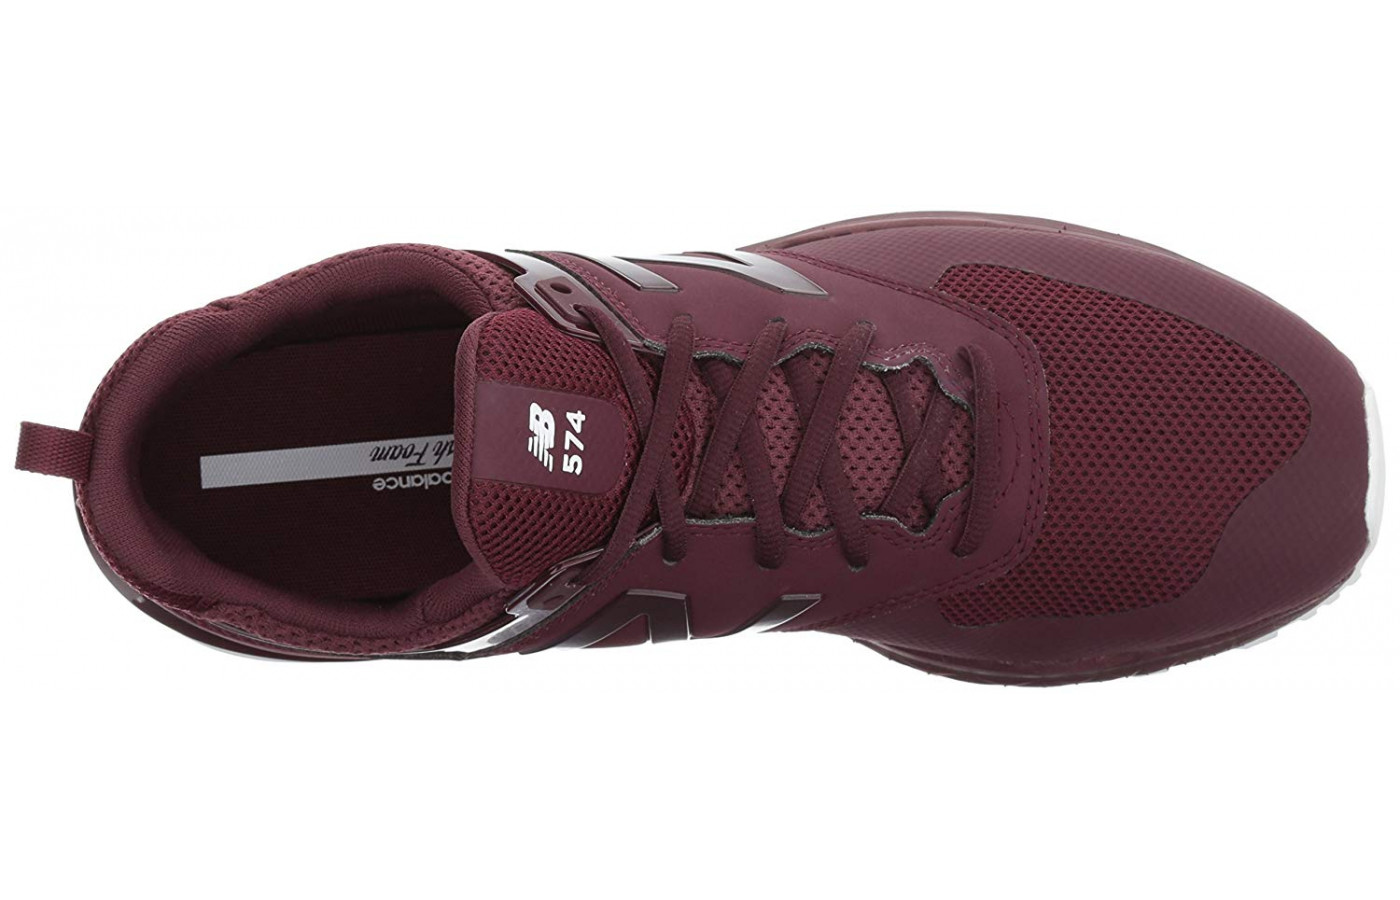 The 574 Sport's upper is made of synthetic mesh and natural suede.